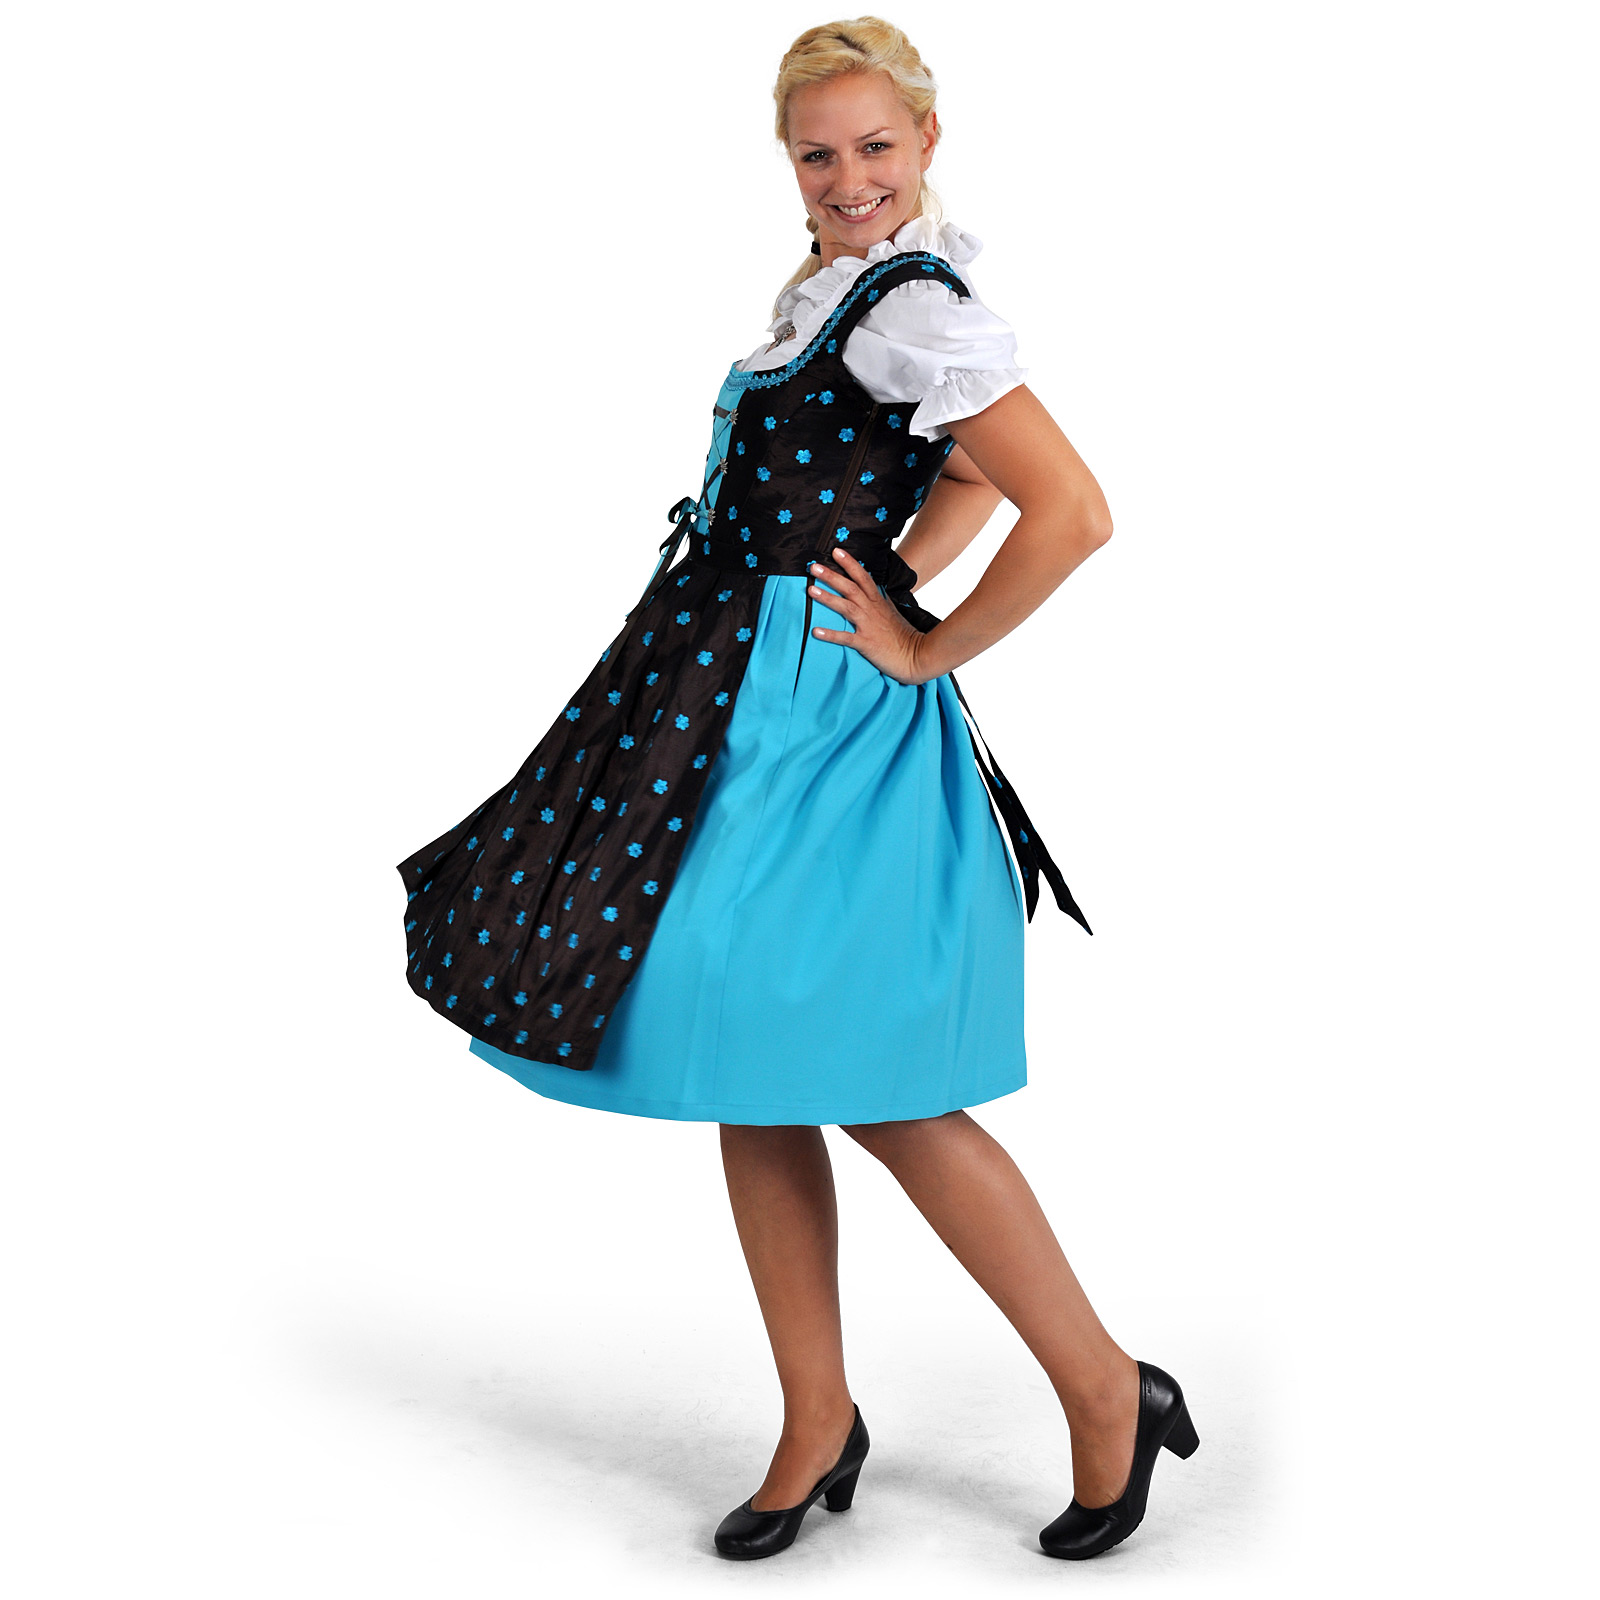 Edelweiss Dirndl - Brown/Turquoise Traditional Dress with Blouse Insert